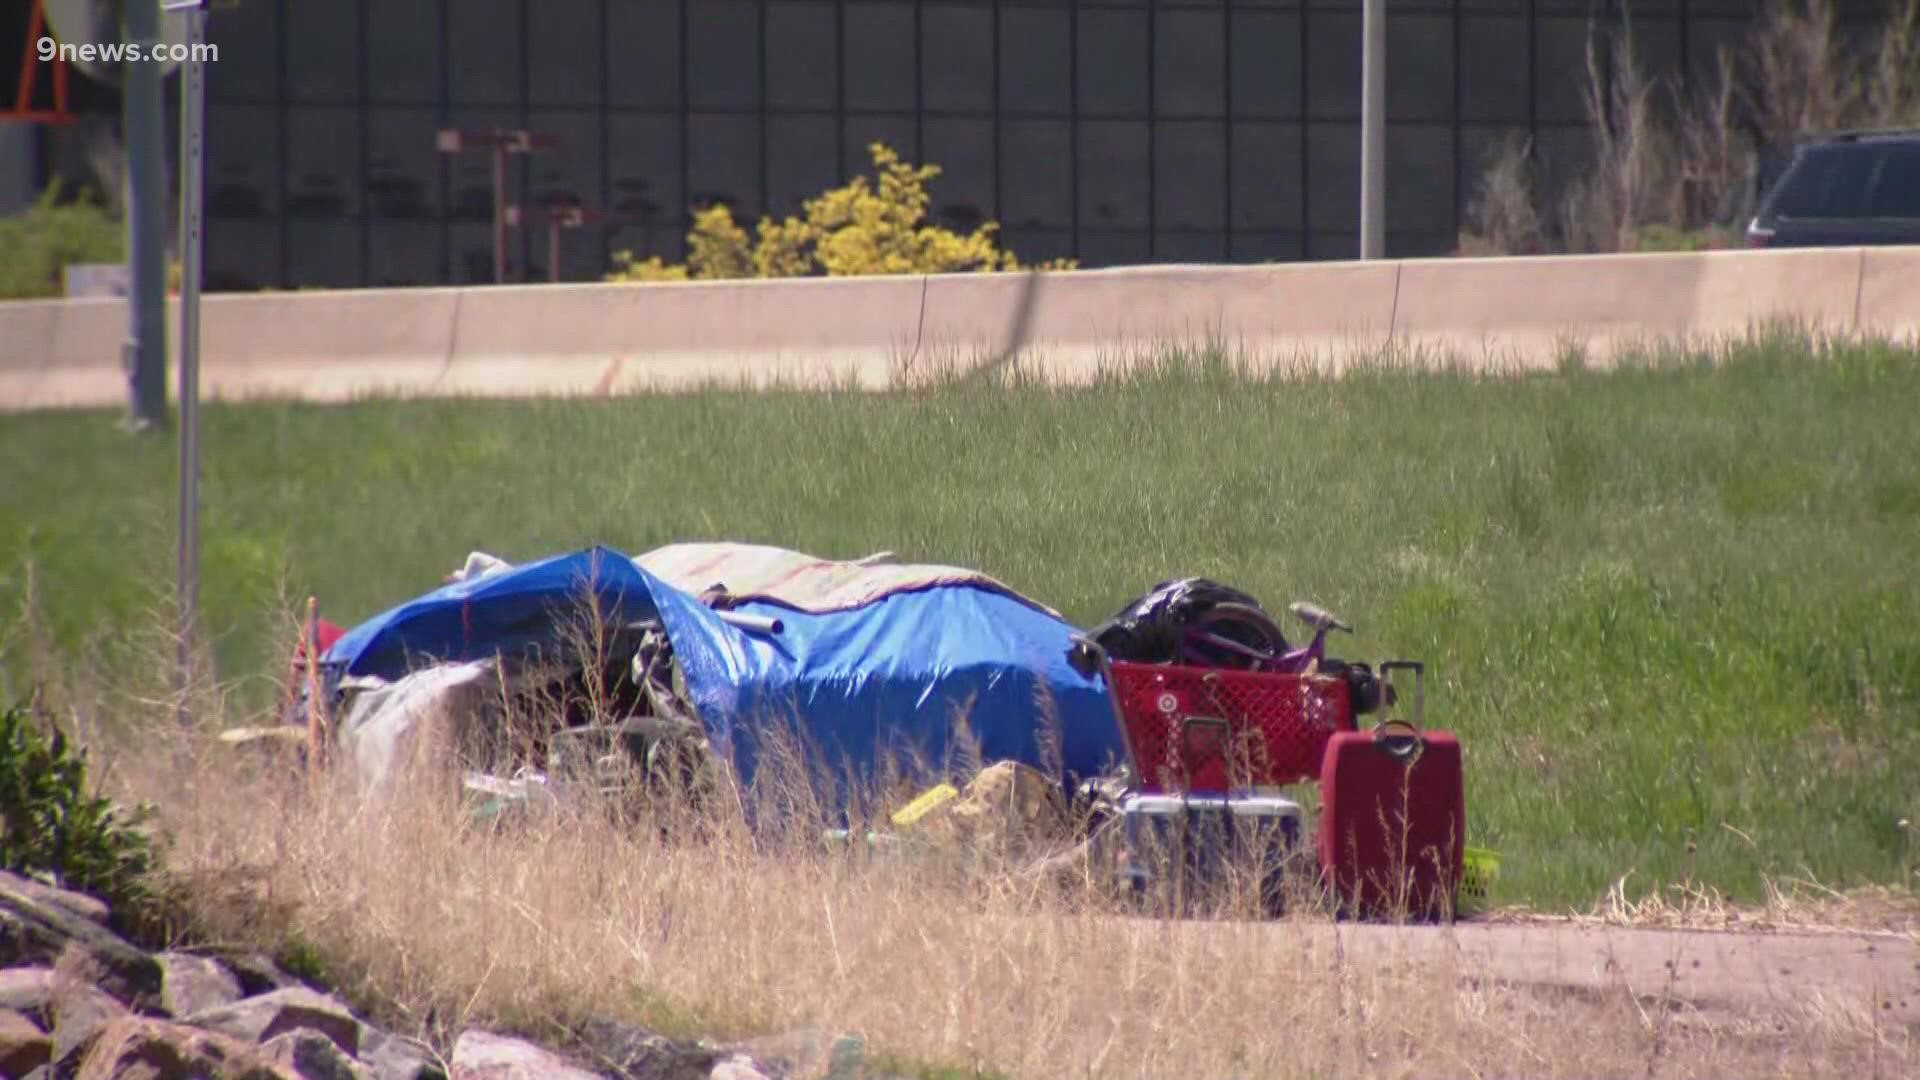 The ban prohibits all urban camping on private and public property within Aurora.